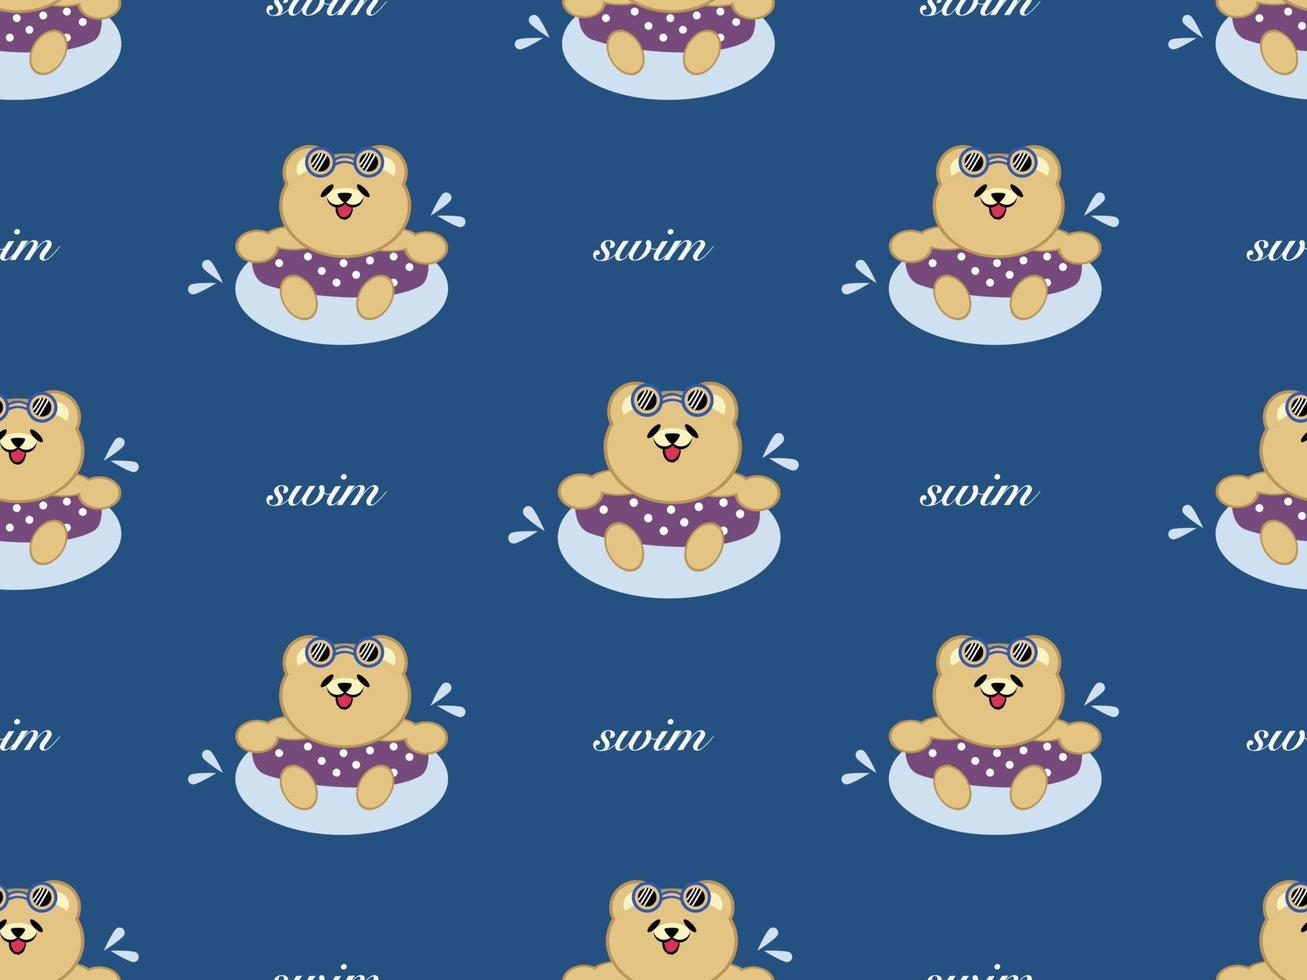 Bear swimming cartoon character seamless pattern on blue background vector